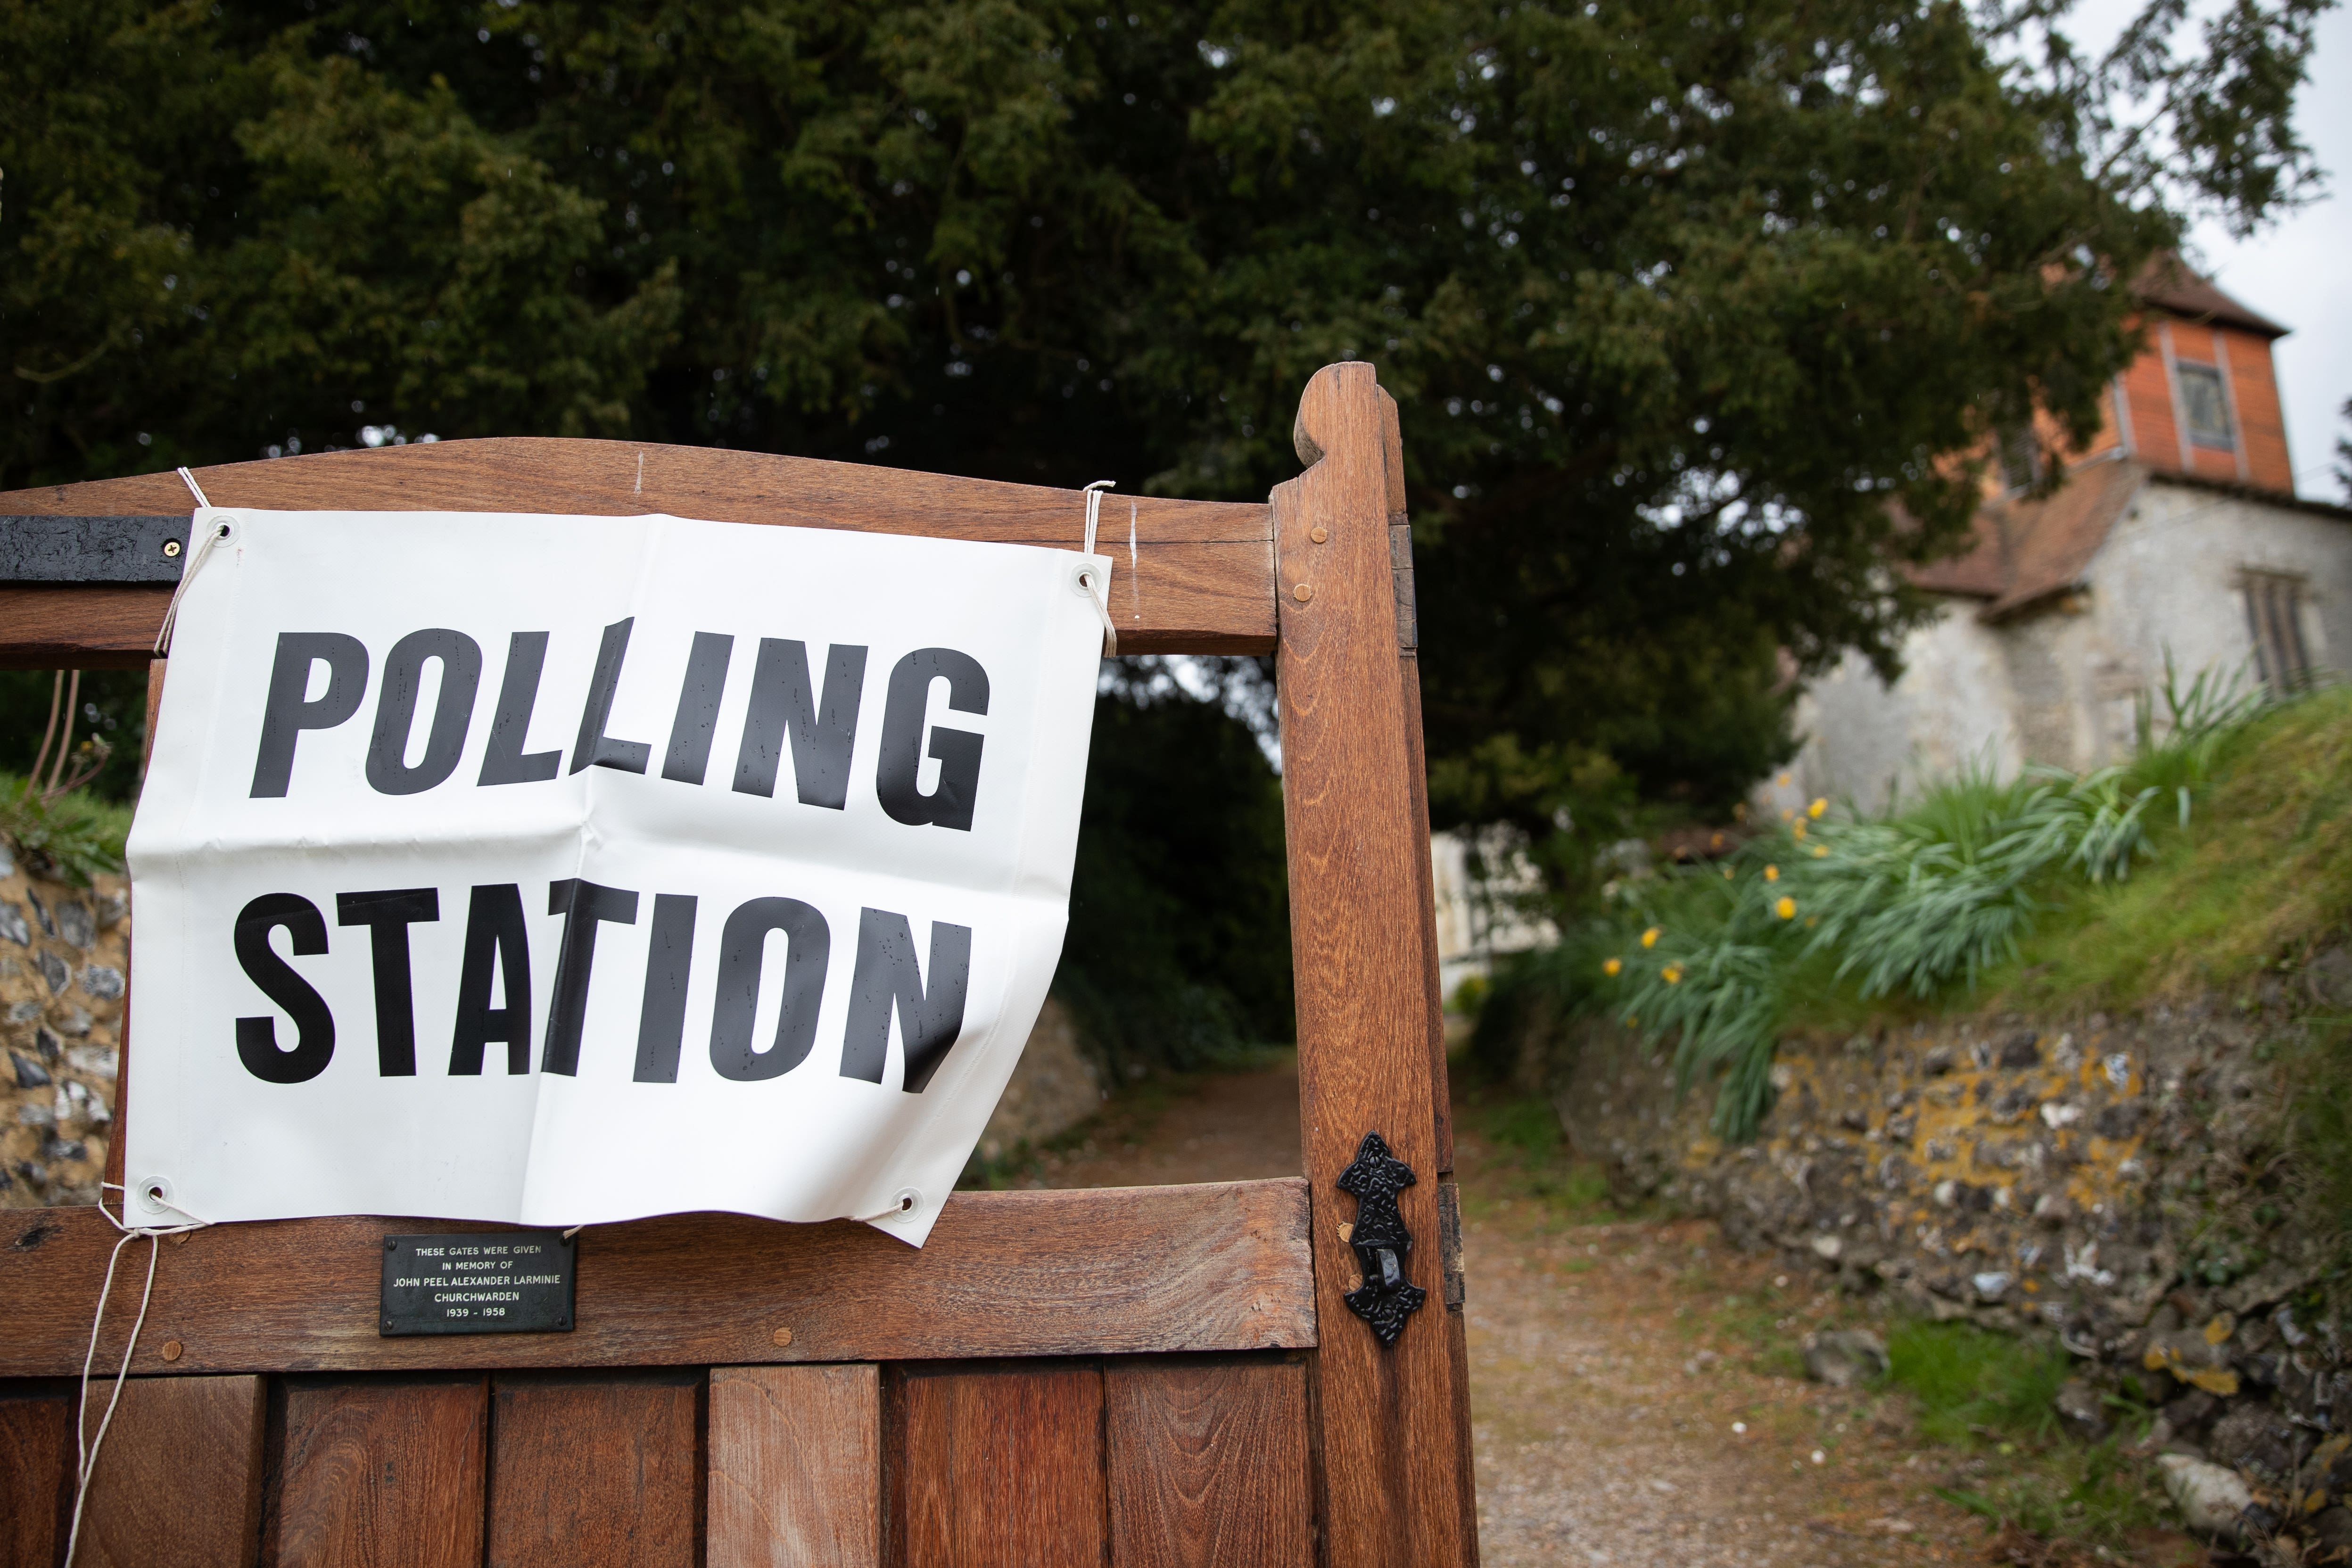 Many will be looking at the results of the local elections for clues on which way the general election in their area